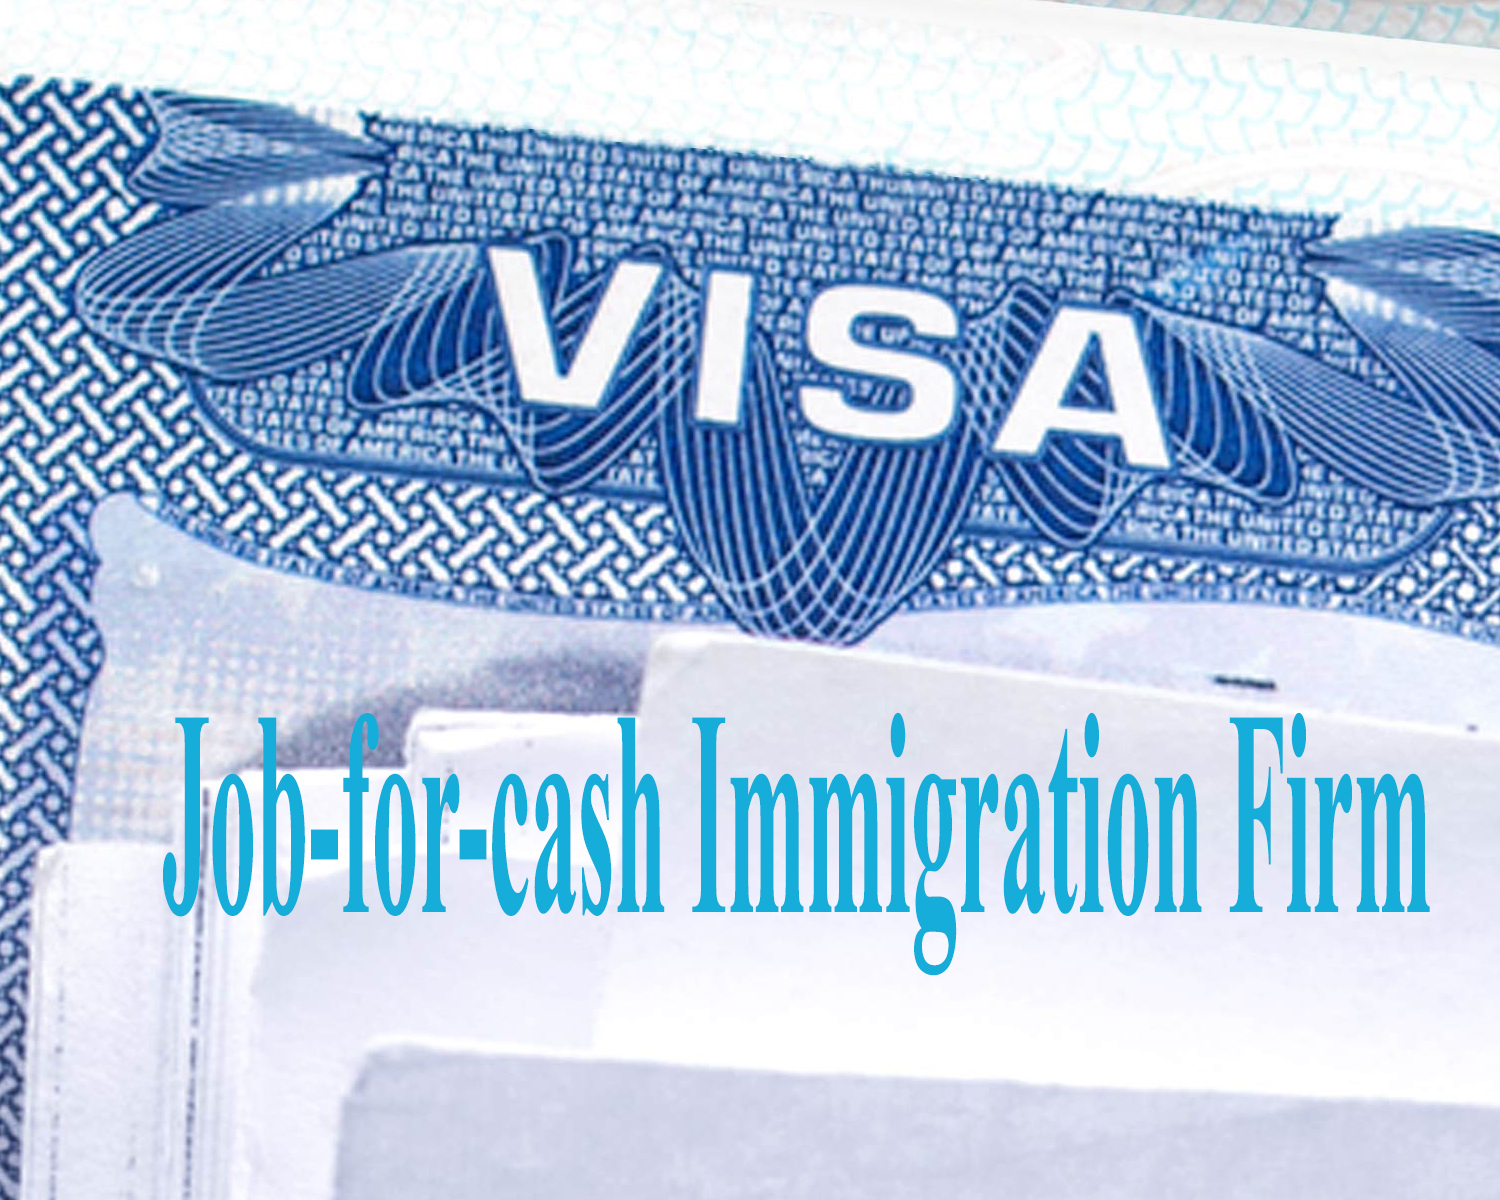 Job for cash Immigration Firm